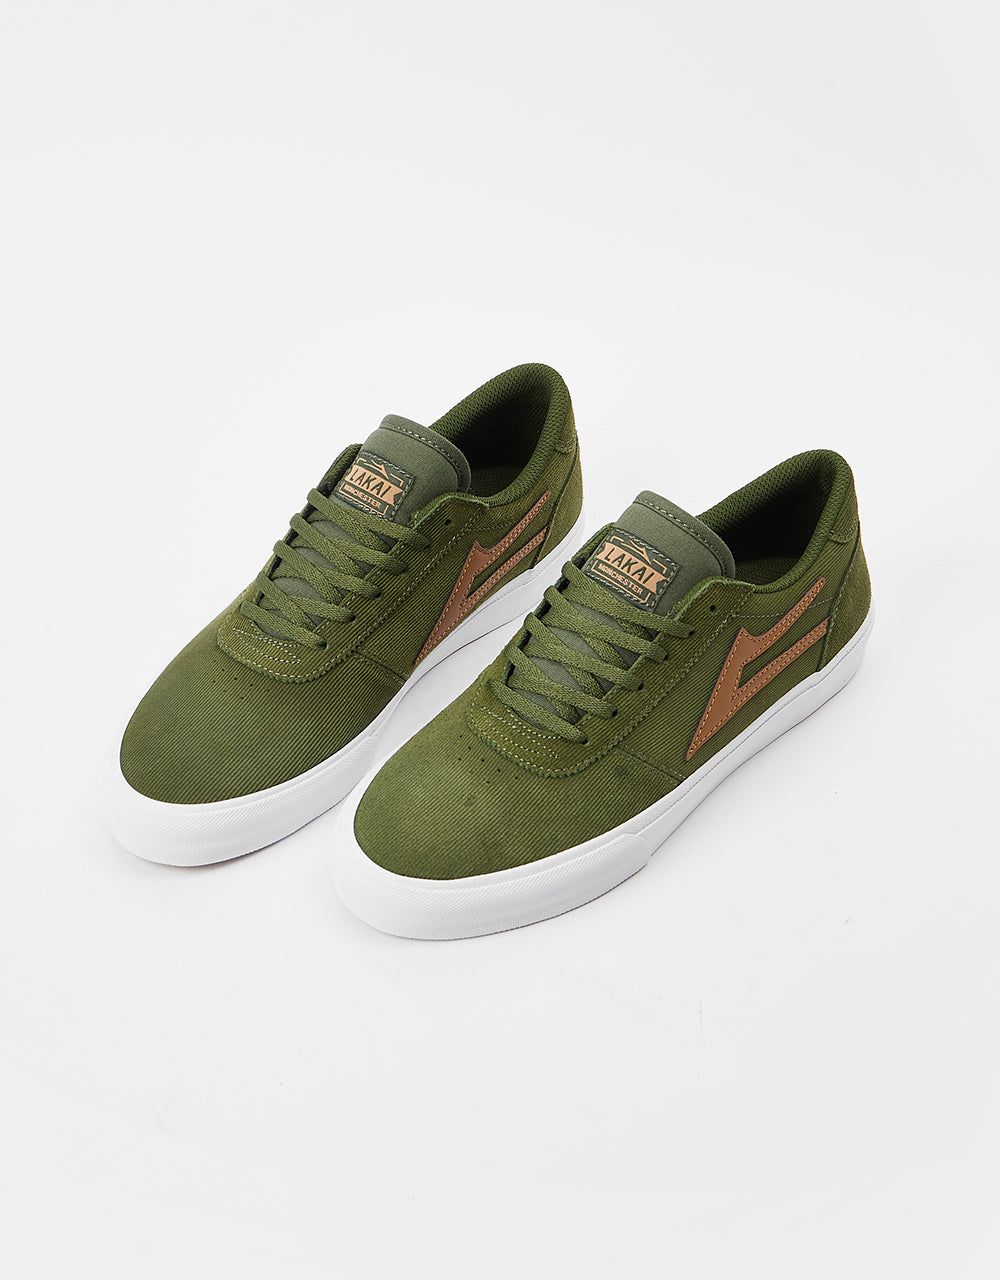 Lakai Manchester Skate Shoes - Olive Cord Suede